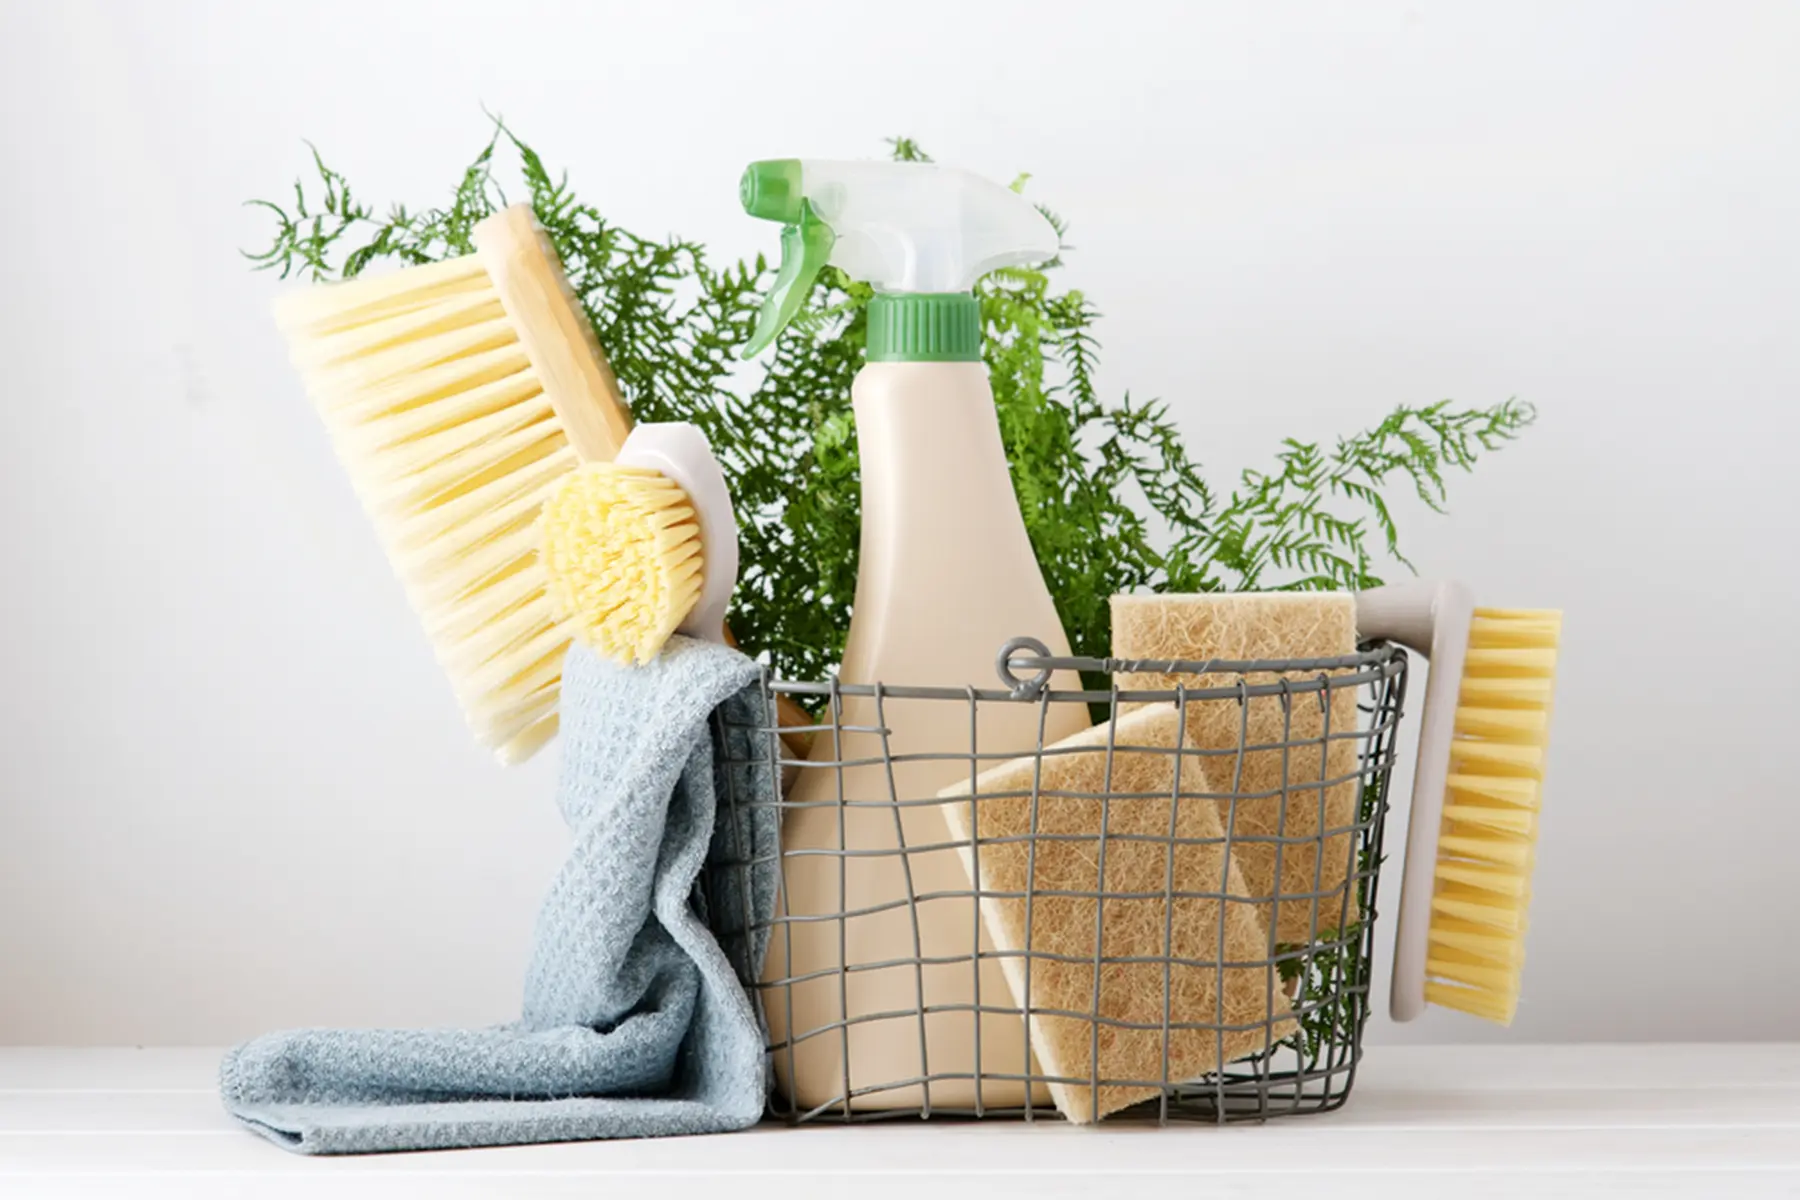 A basket of natural cleaning products